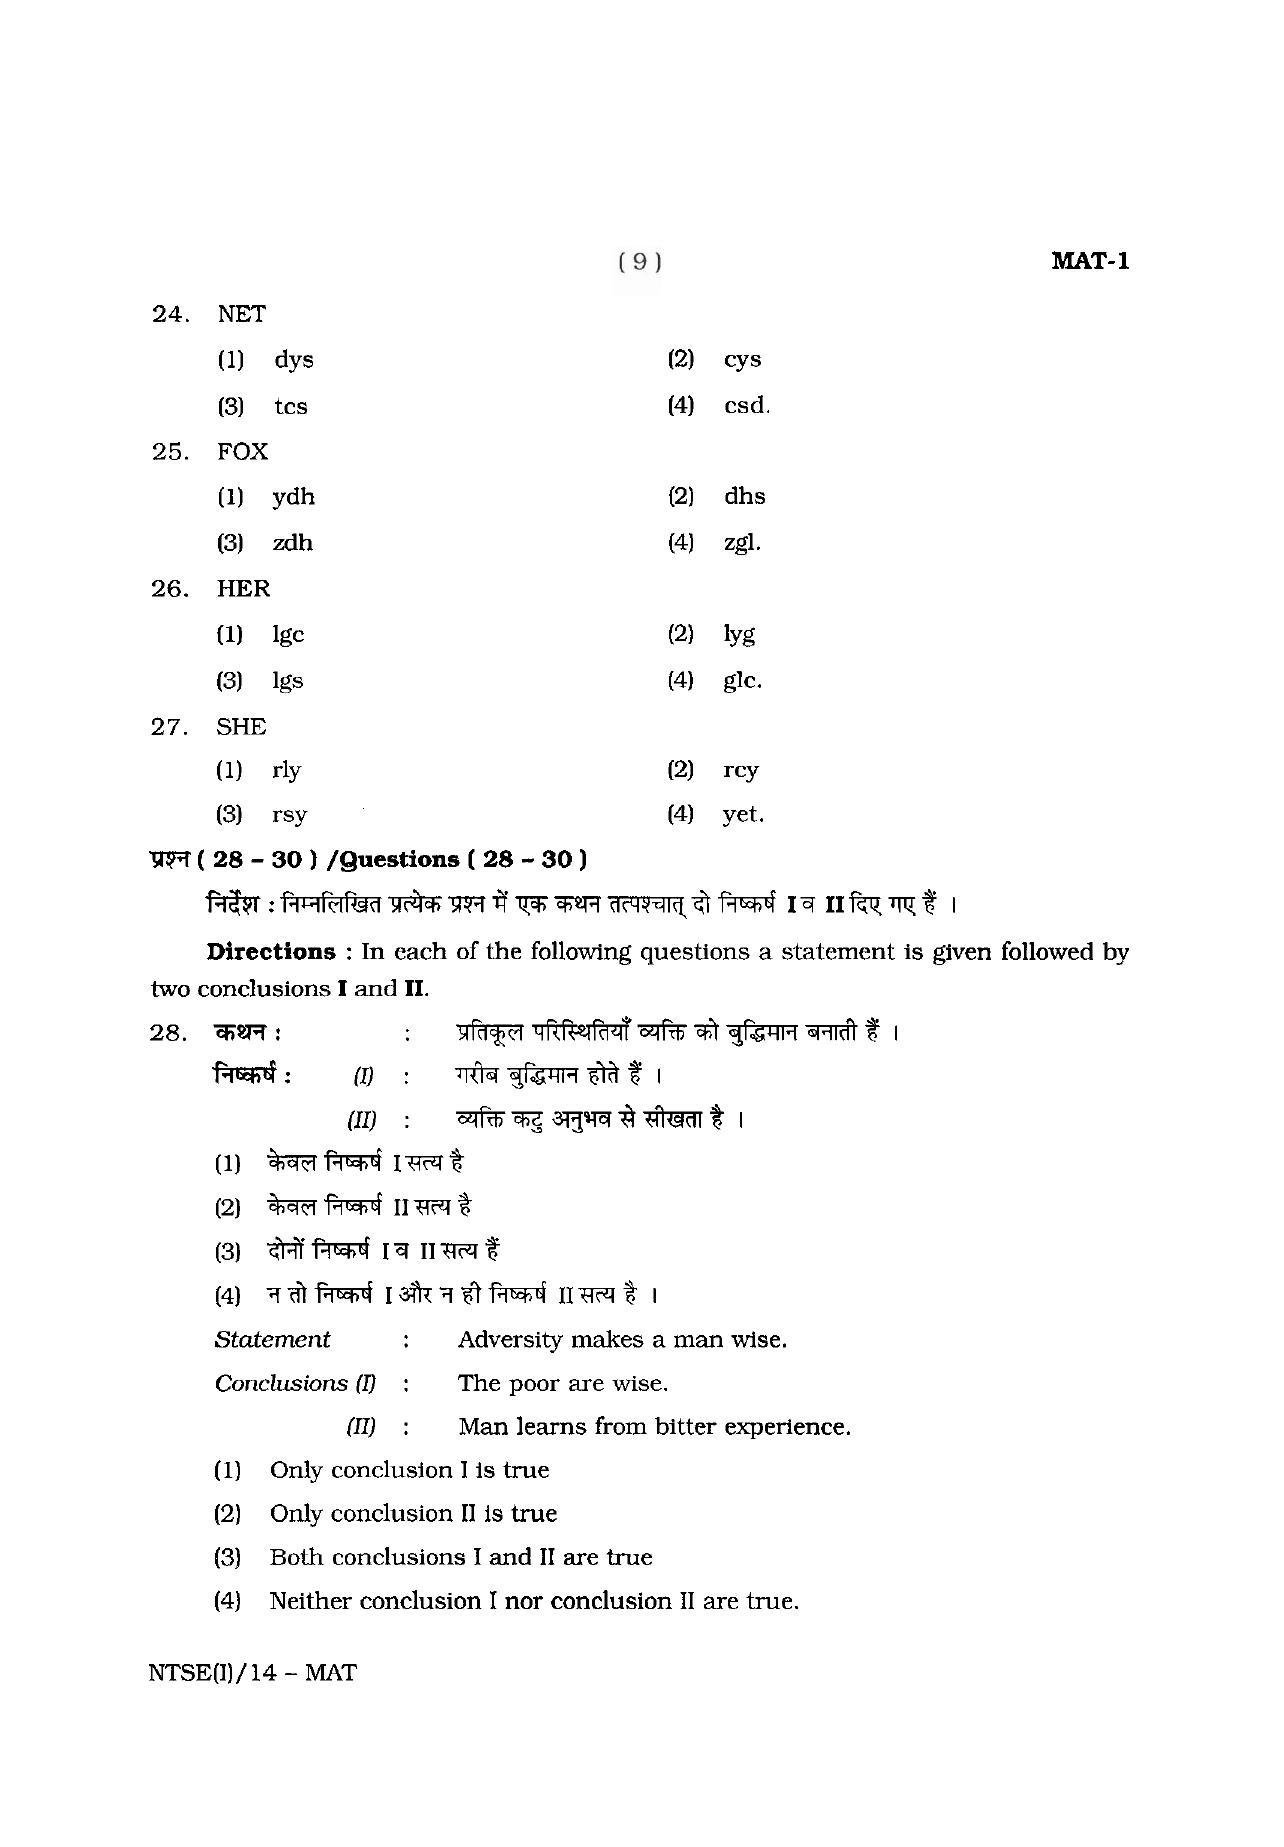 NTSE 2014 (Stage II) MAT Question Paper - Page 9